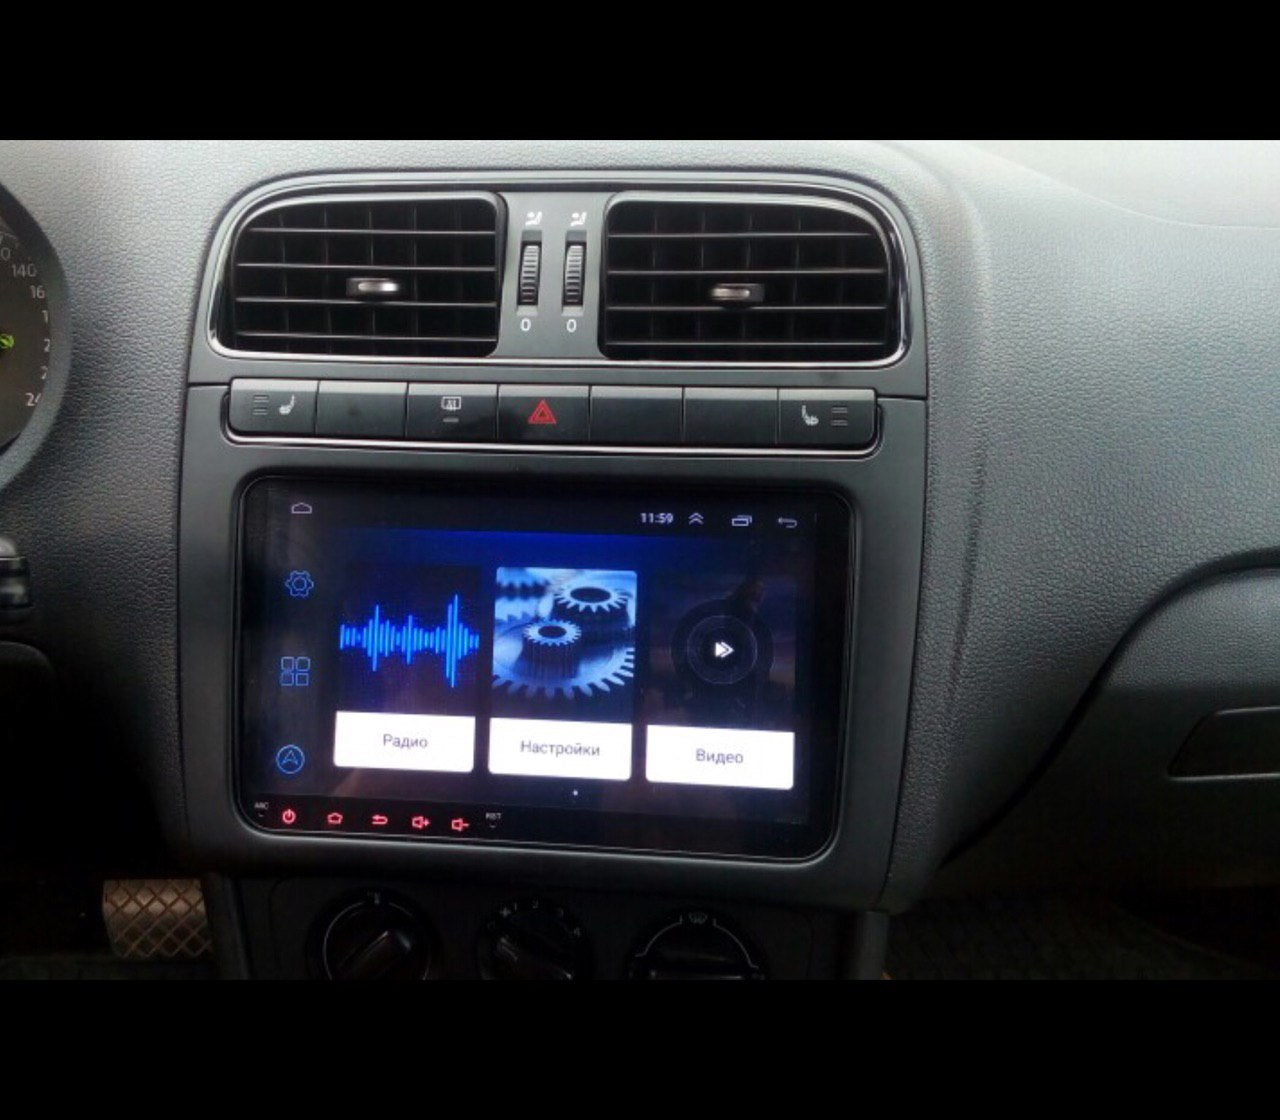 Suitable For VW Google Android 8.1 Double DIN Head Unit for Volkswagen, Skoda Bluetooth, Radio, Video Player